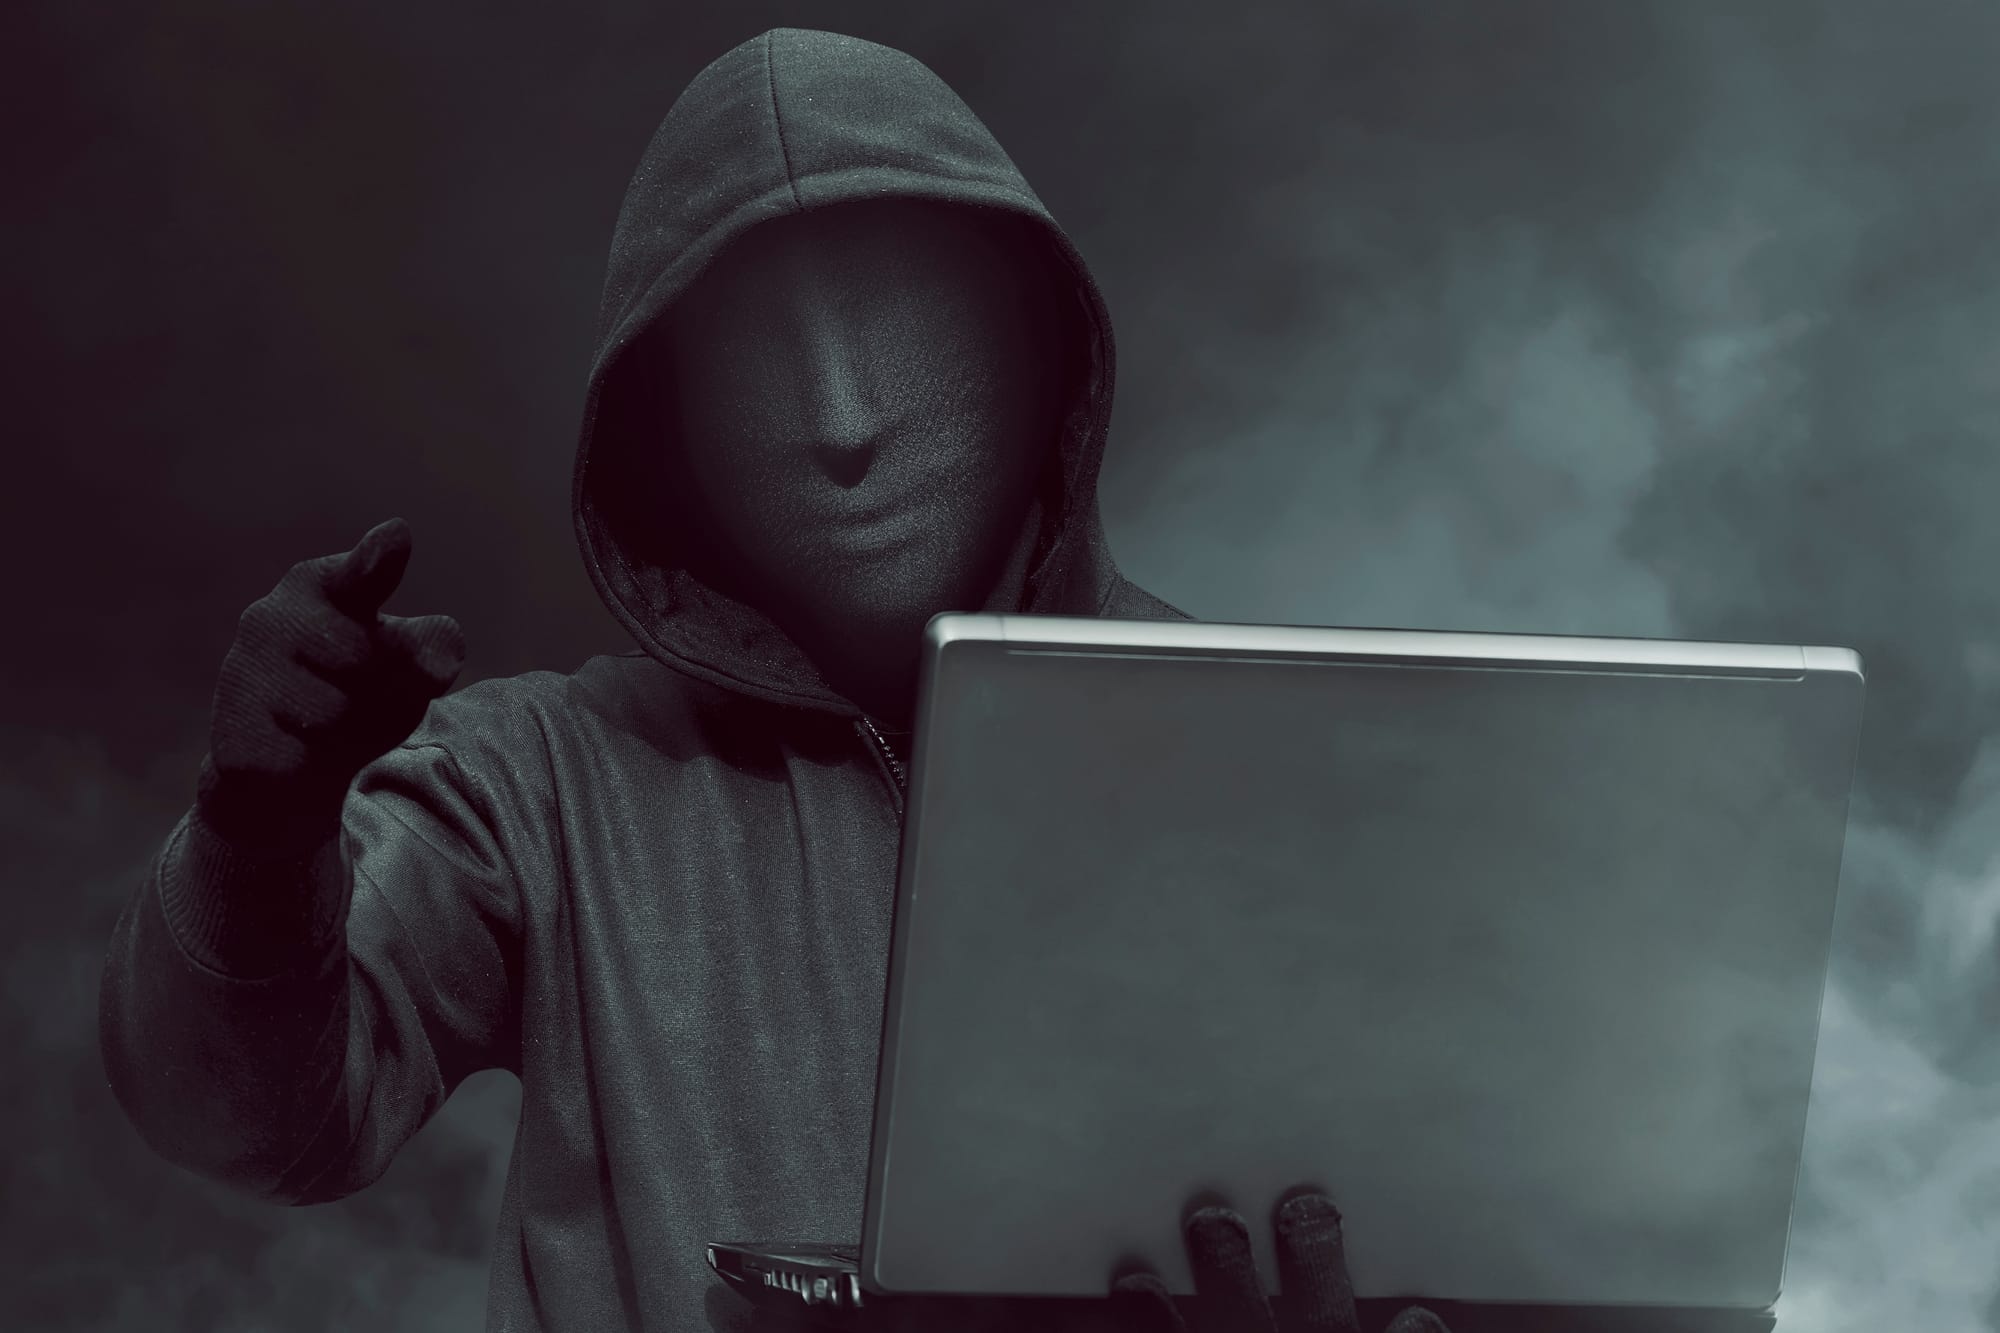 portrait-hooded-hacker-with-mask-holding-laptop-while-standing.jpg